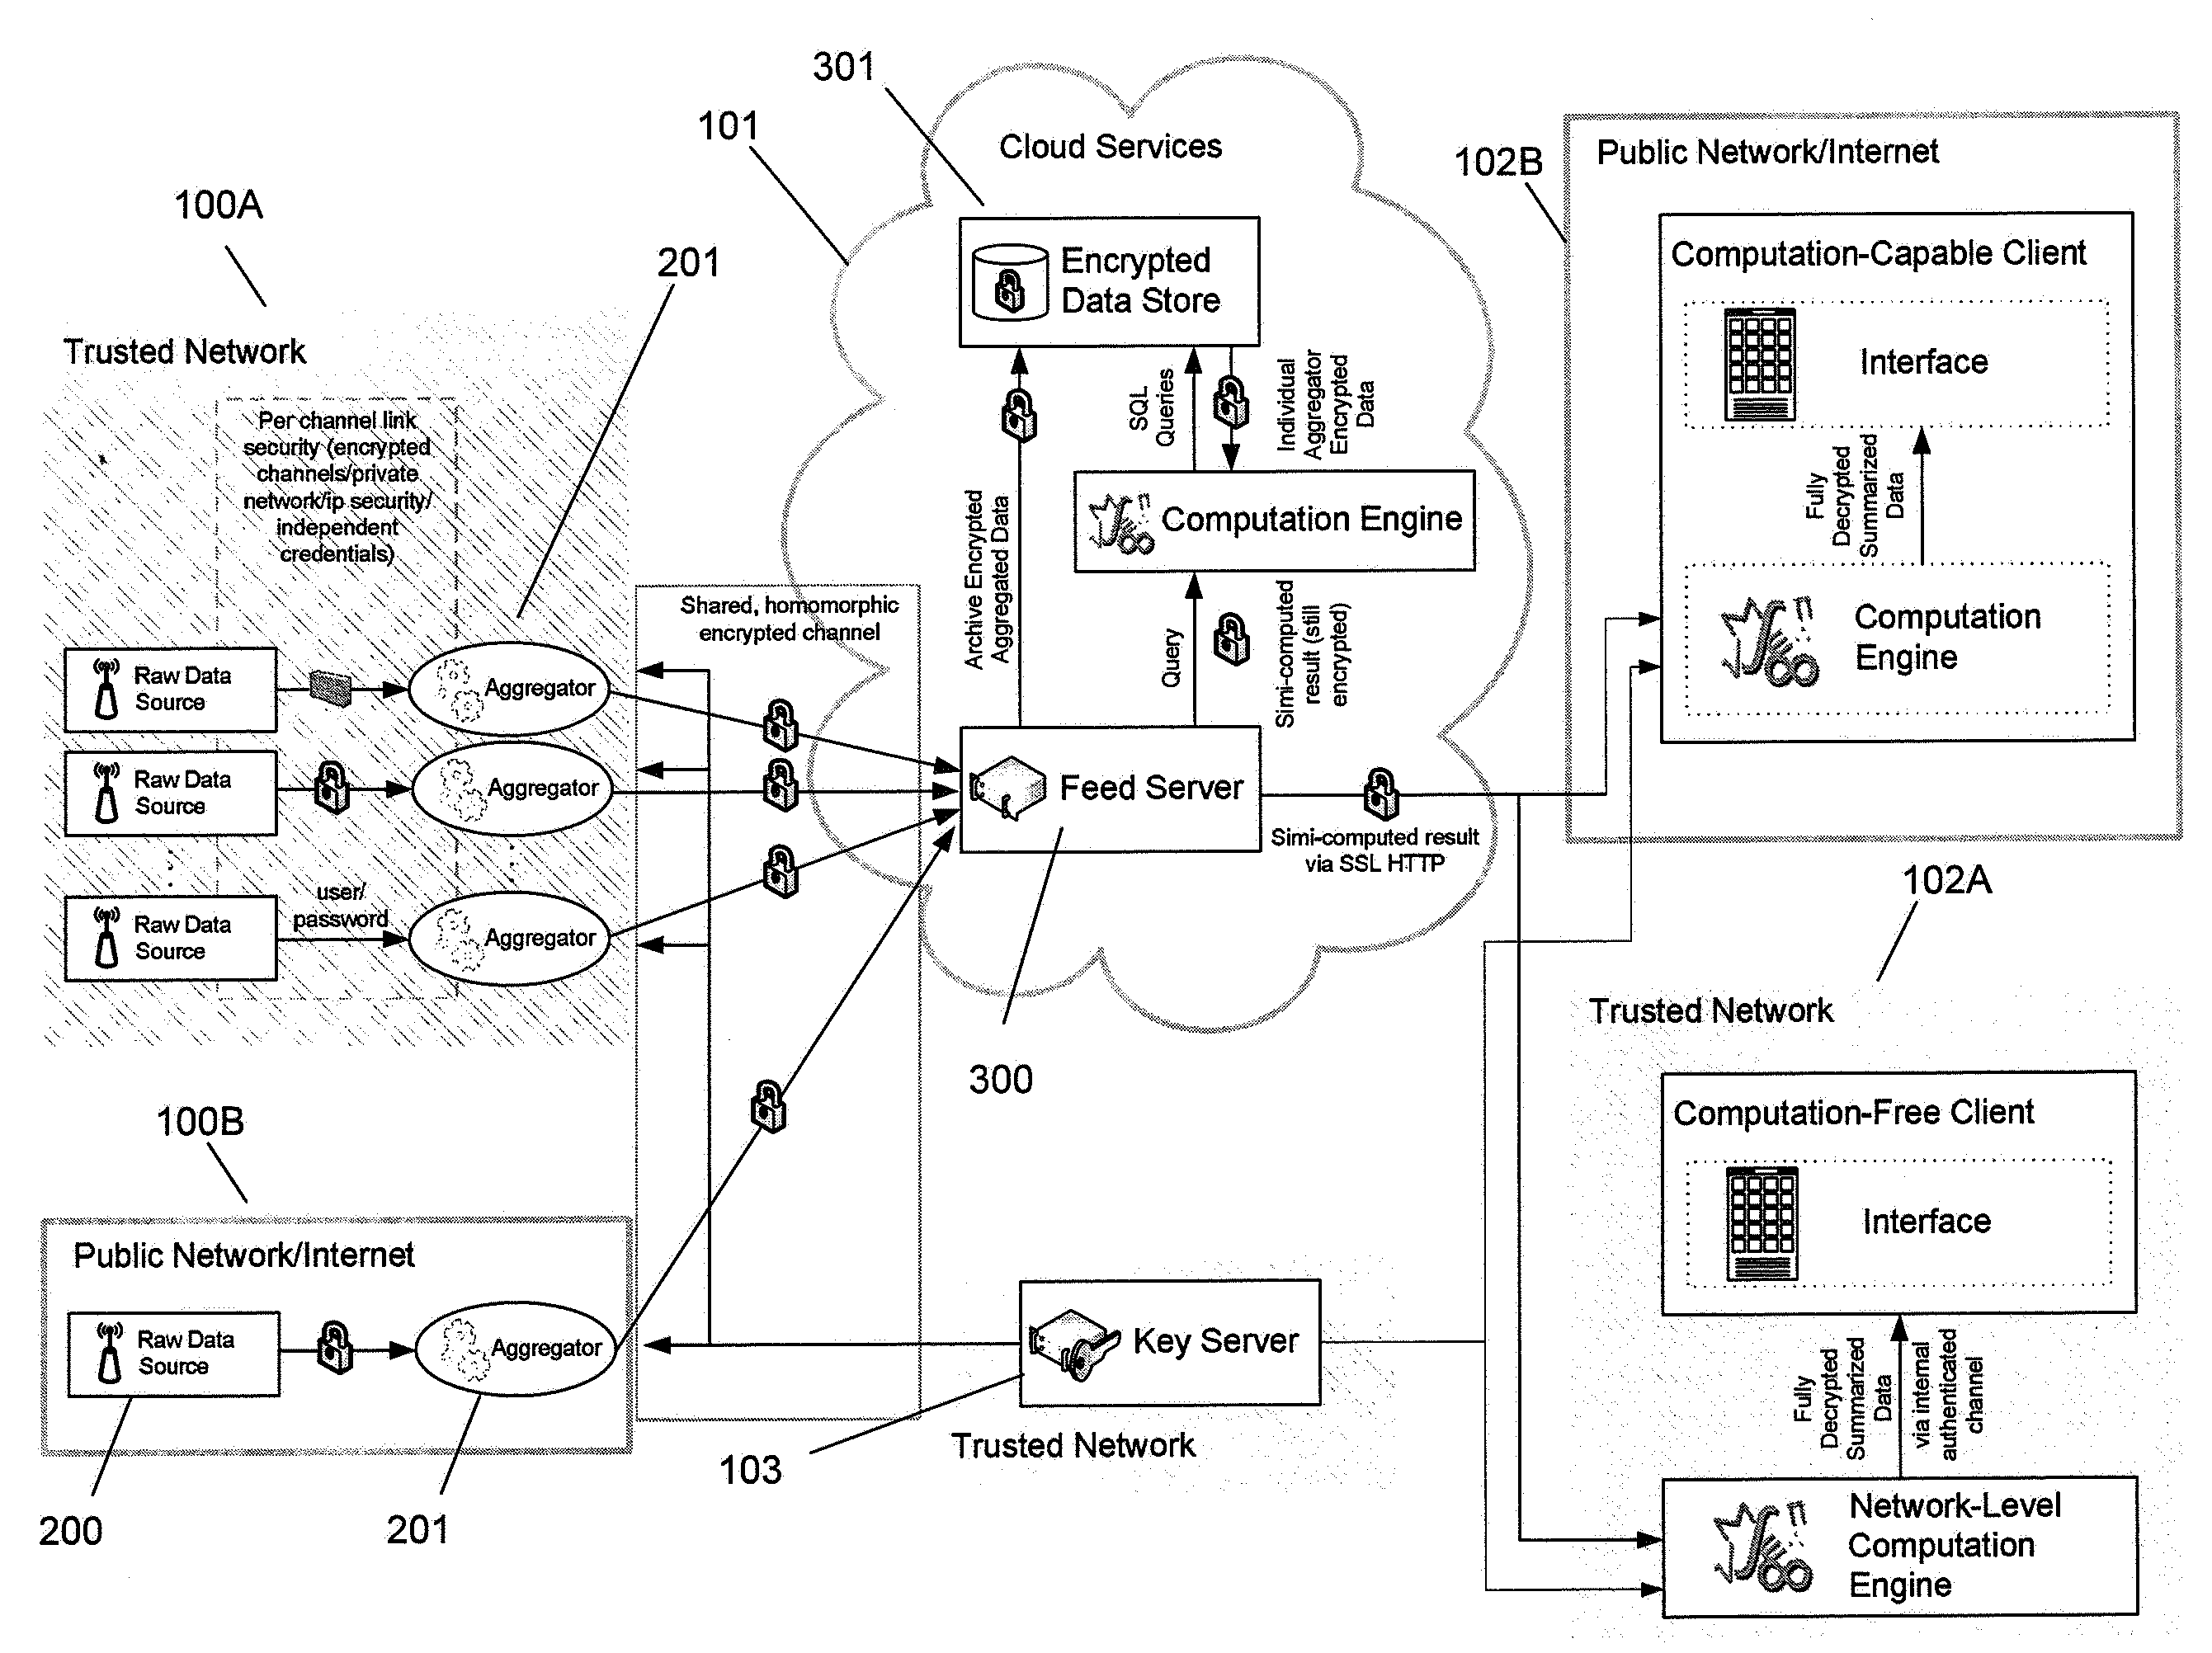 Systems and methods for communication, storage, retrieval, and computation of simple statistics and logical operations on encrypted data